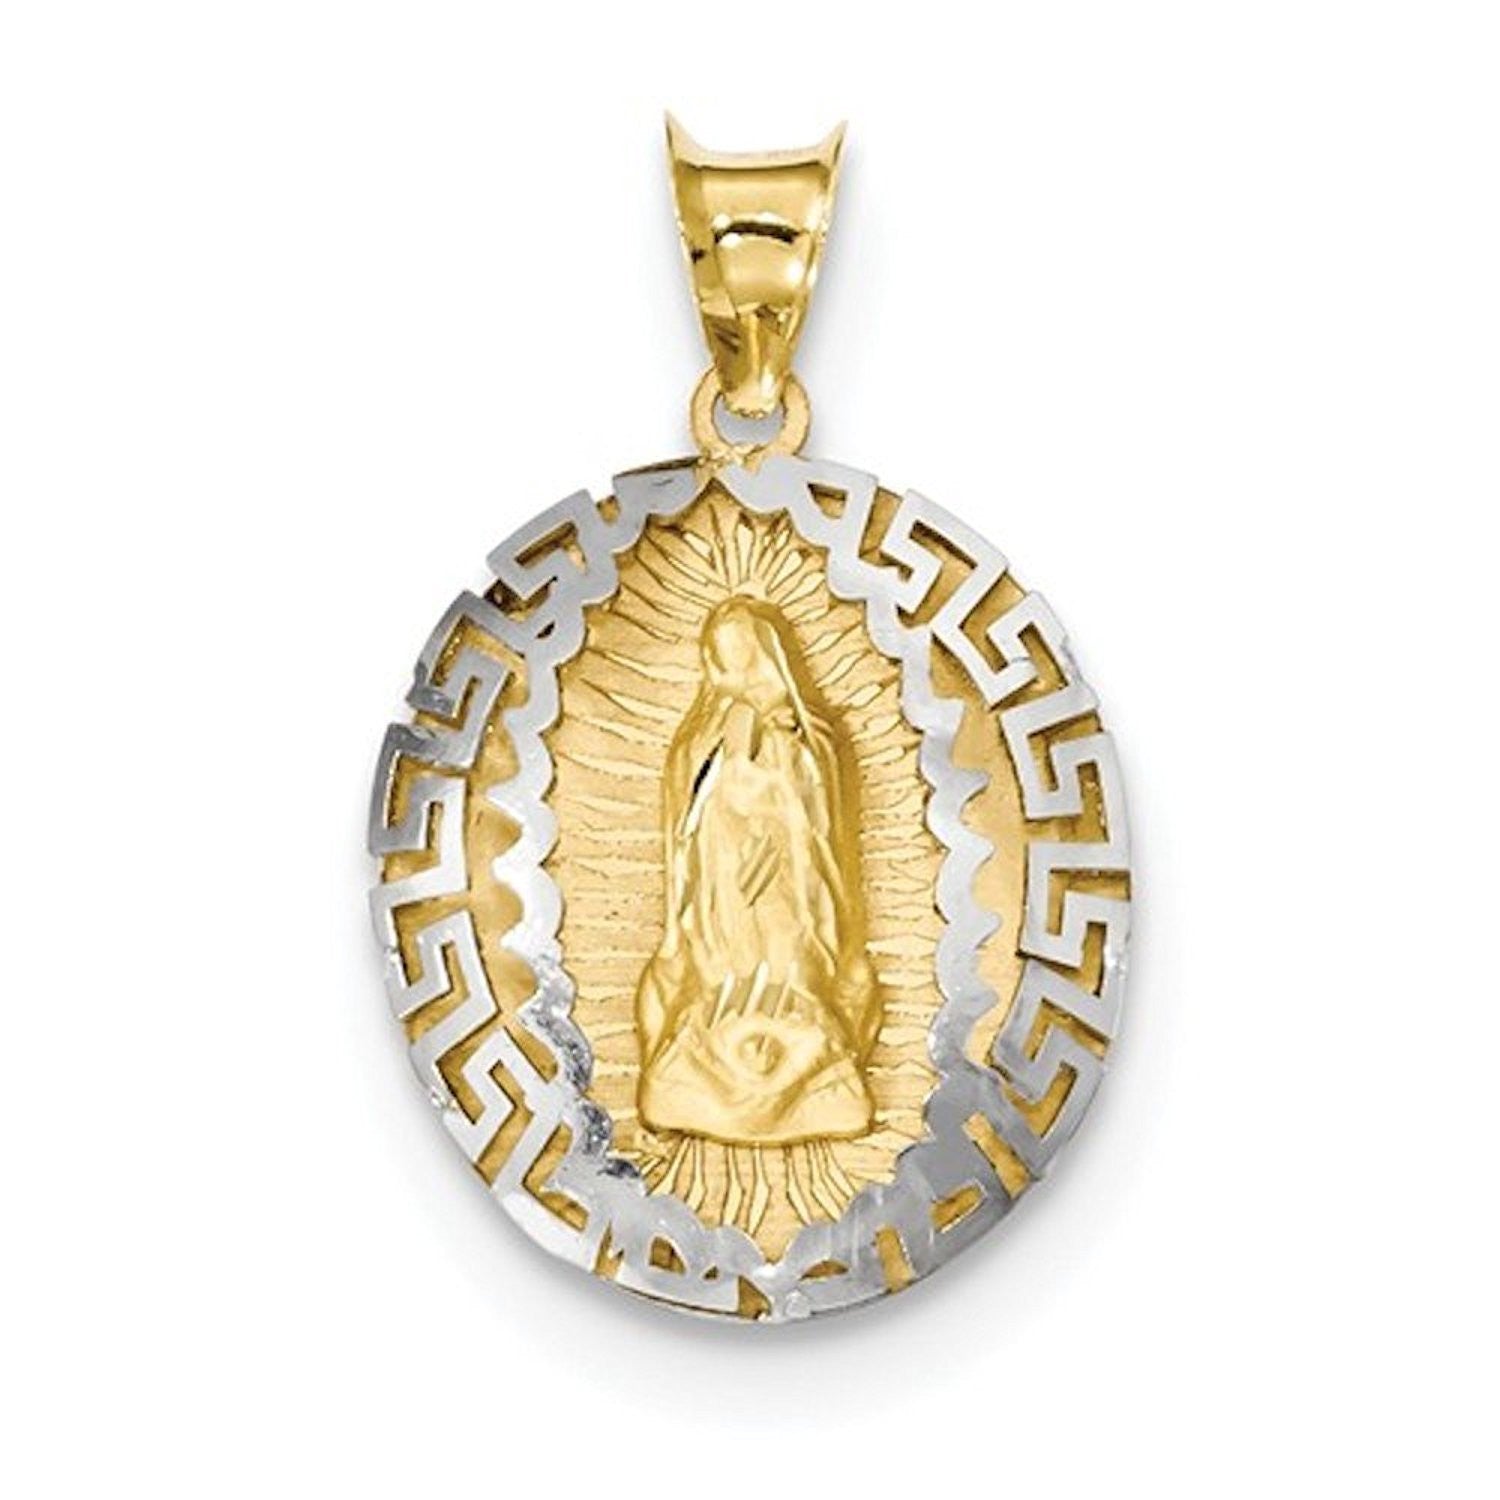 14k Gold Two Tone Our Lady of Guadalupe Pendant Charm